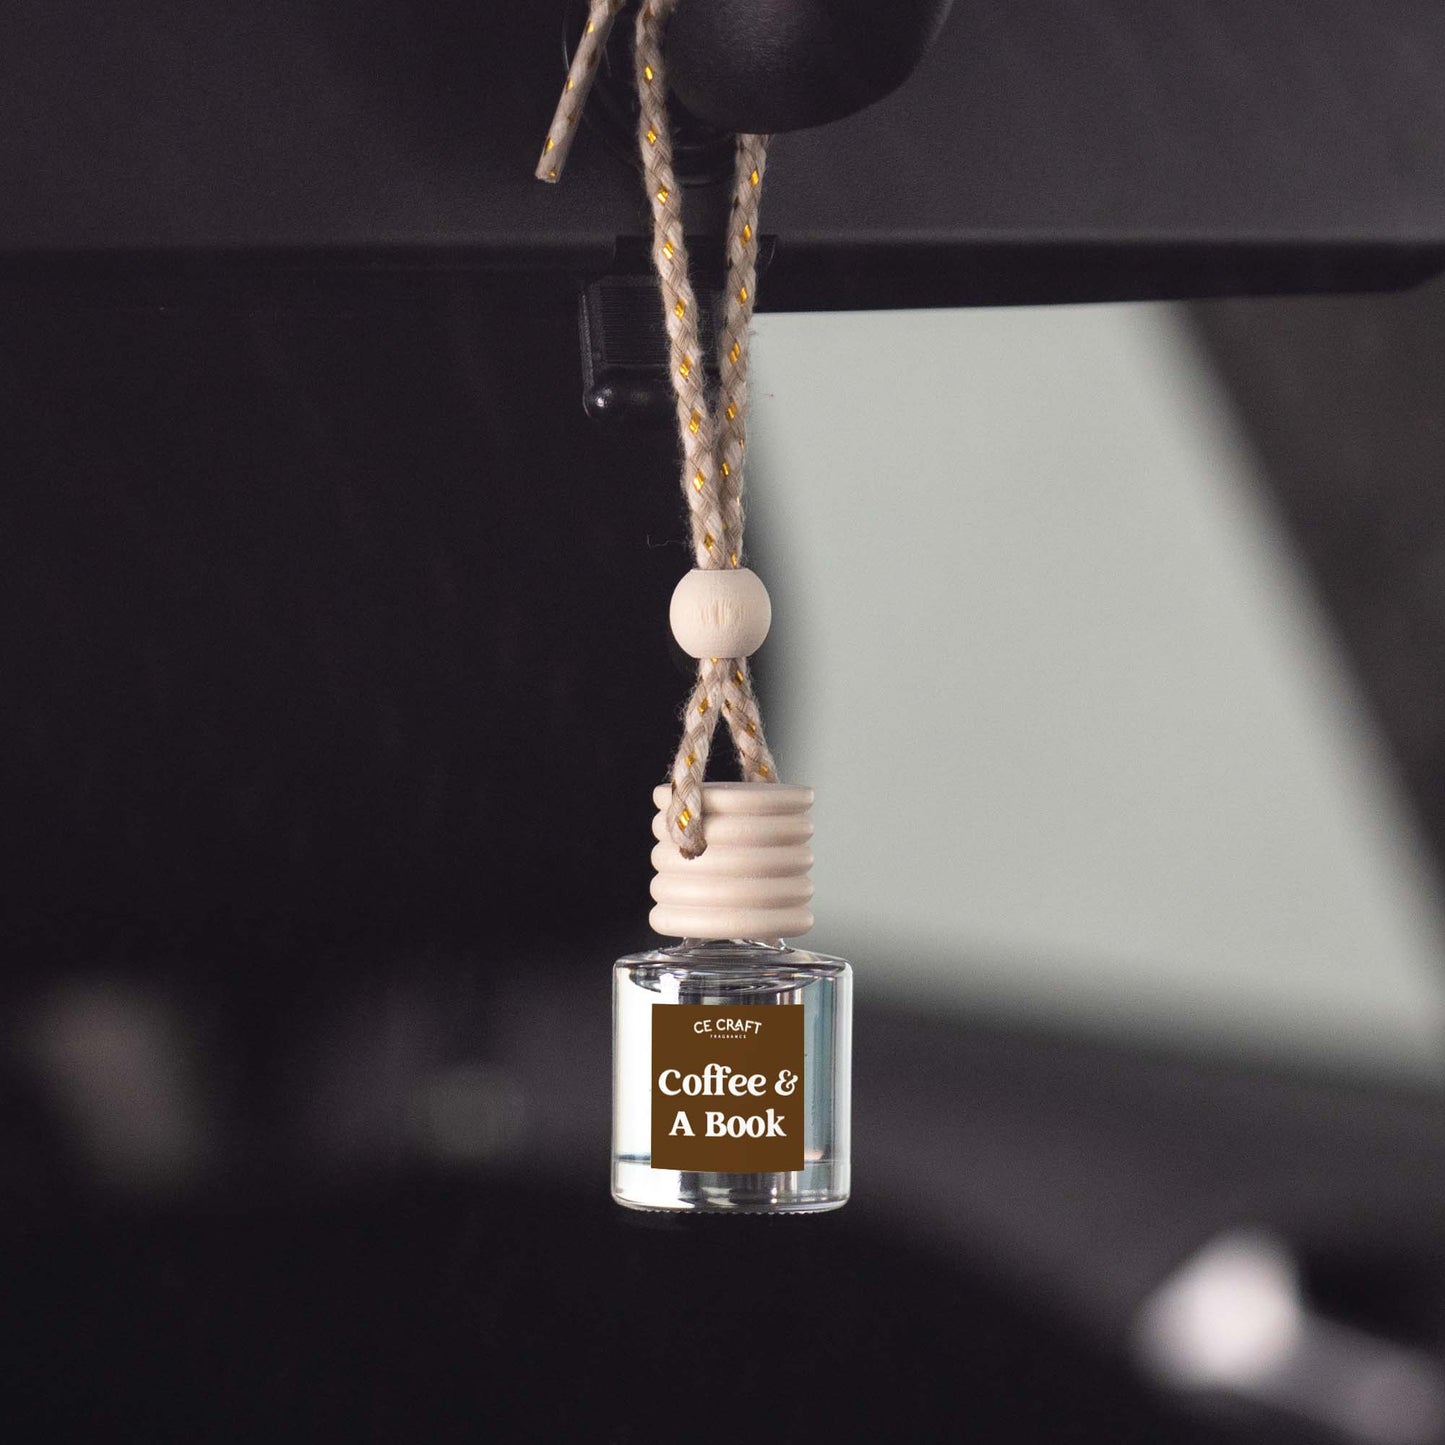 Coffee & A Book Scented Car Freshener Vehicle Air Fresheners CE Craft 